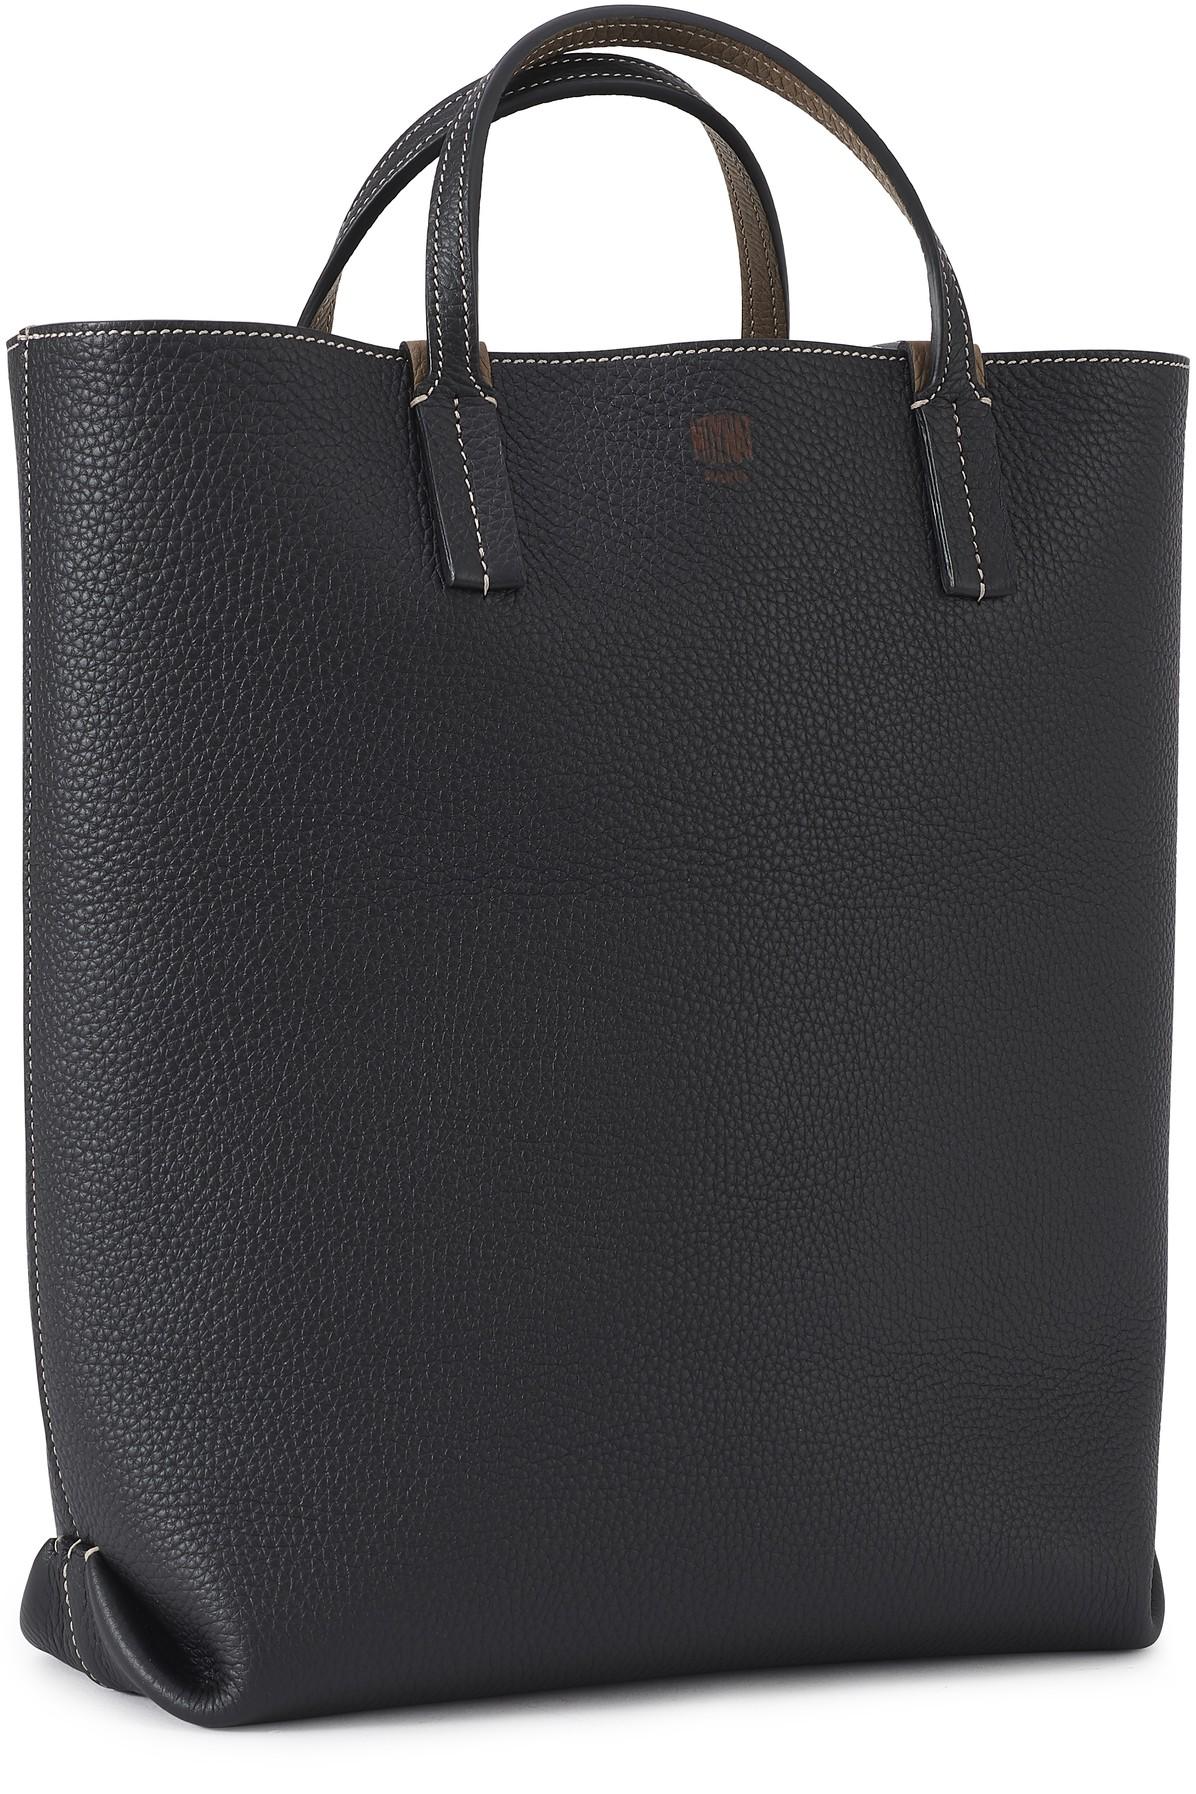 The new reversible Duo Tote from Moynat Paris. Elevate everyday